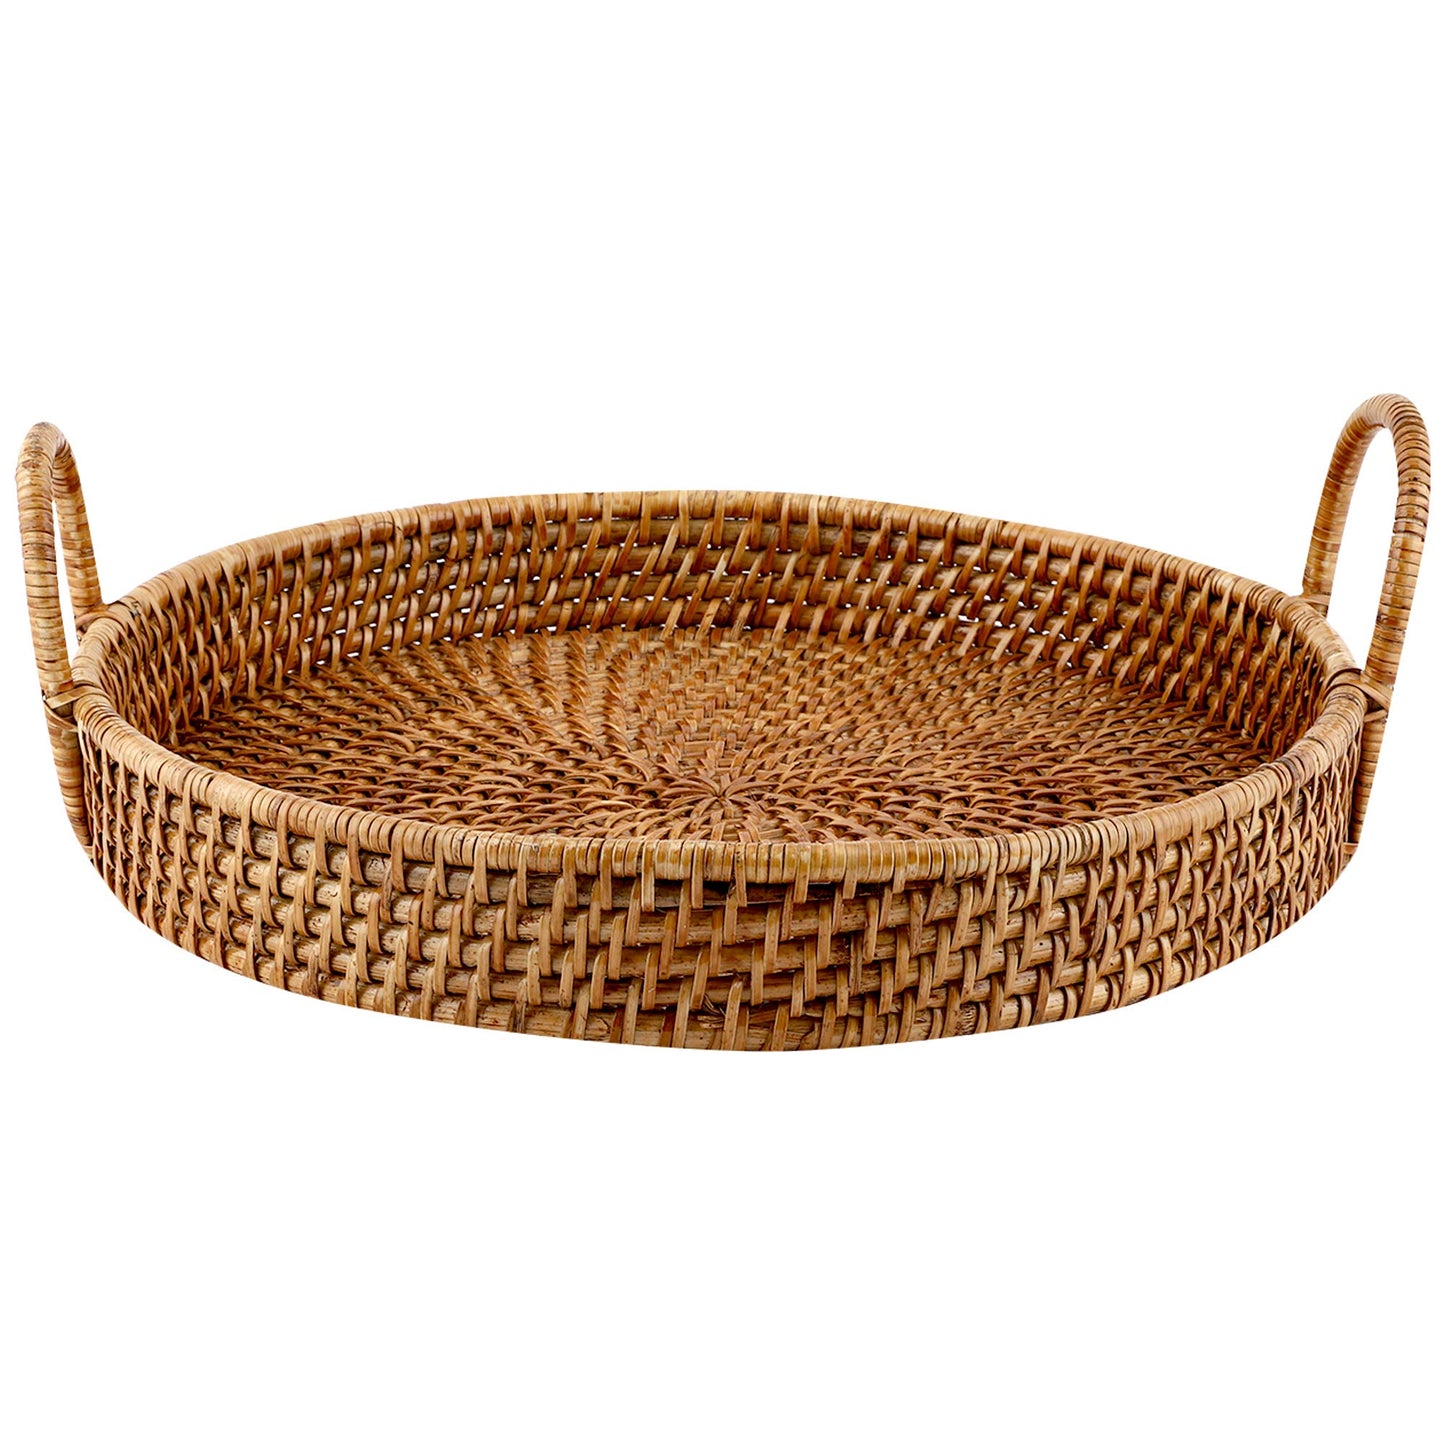 AKWAY Wicker Serving Tray Wooden Serving Tray for Home | Dining Table Decorative Trays | Serving Tray for Party Guests | Rectangle Platter with Handles Diwali or Deepawali Gifts (Beige) - Akway